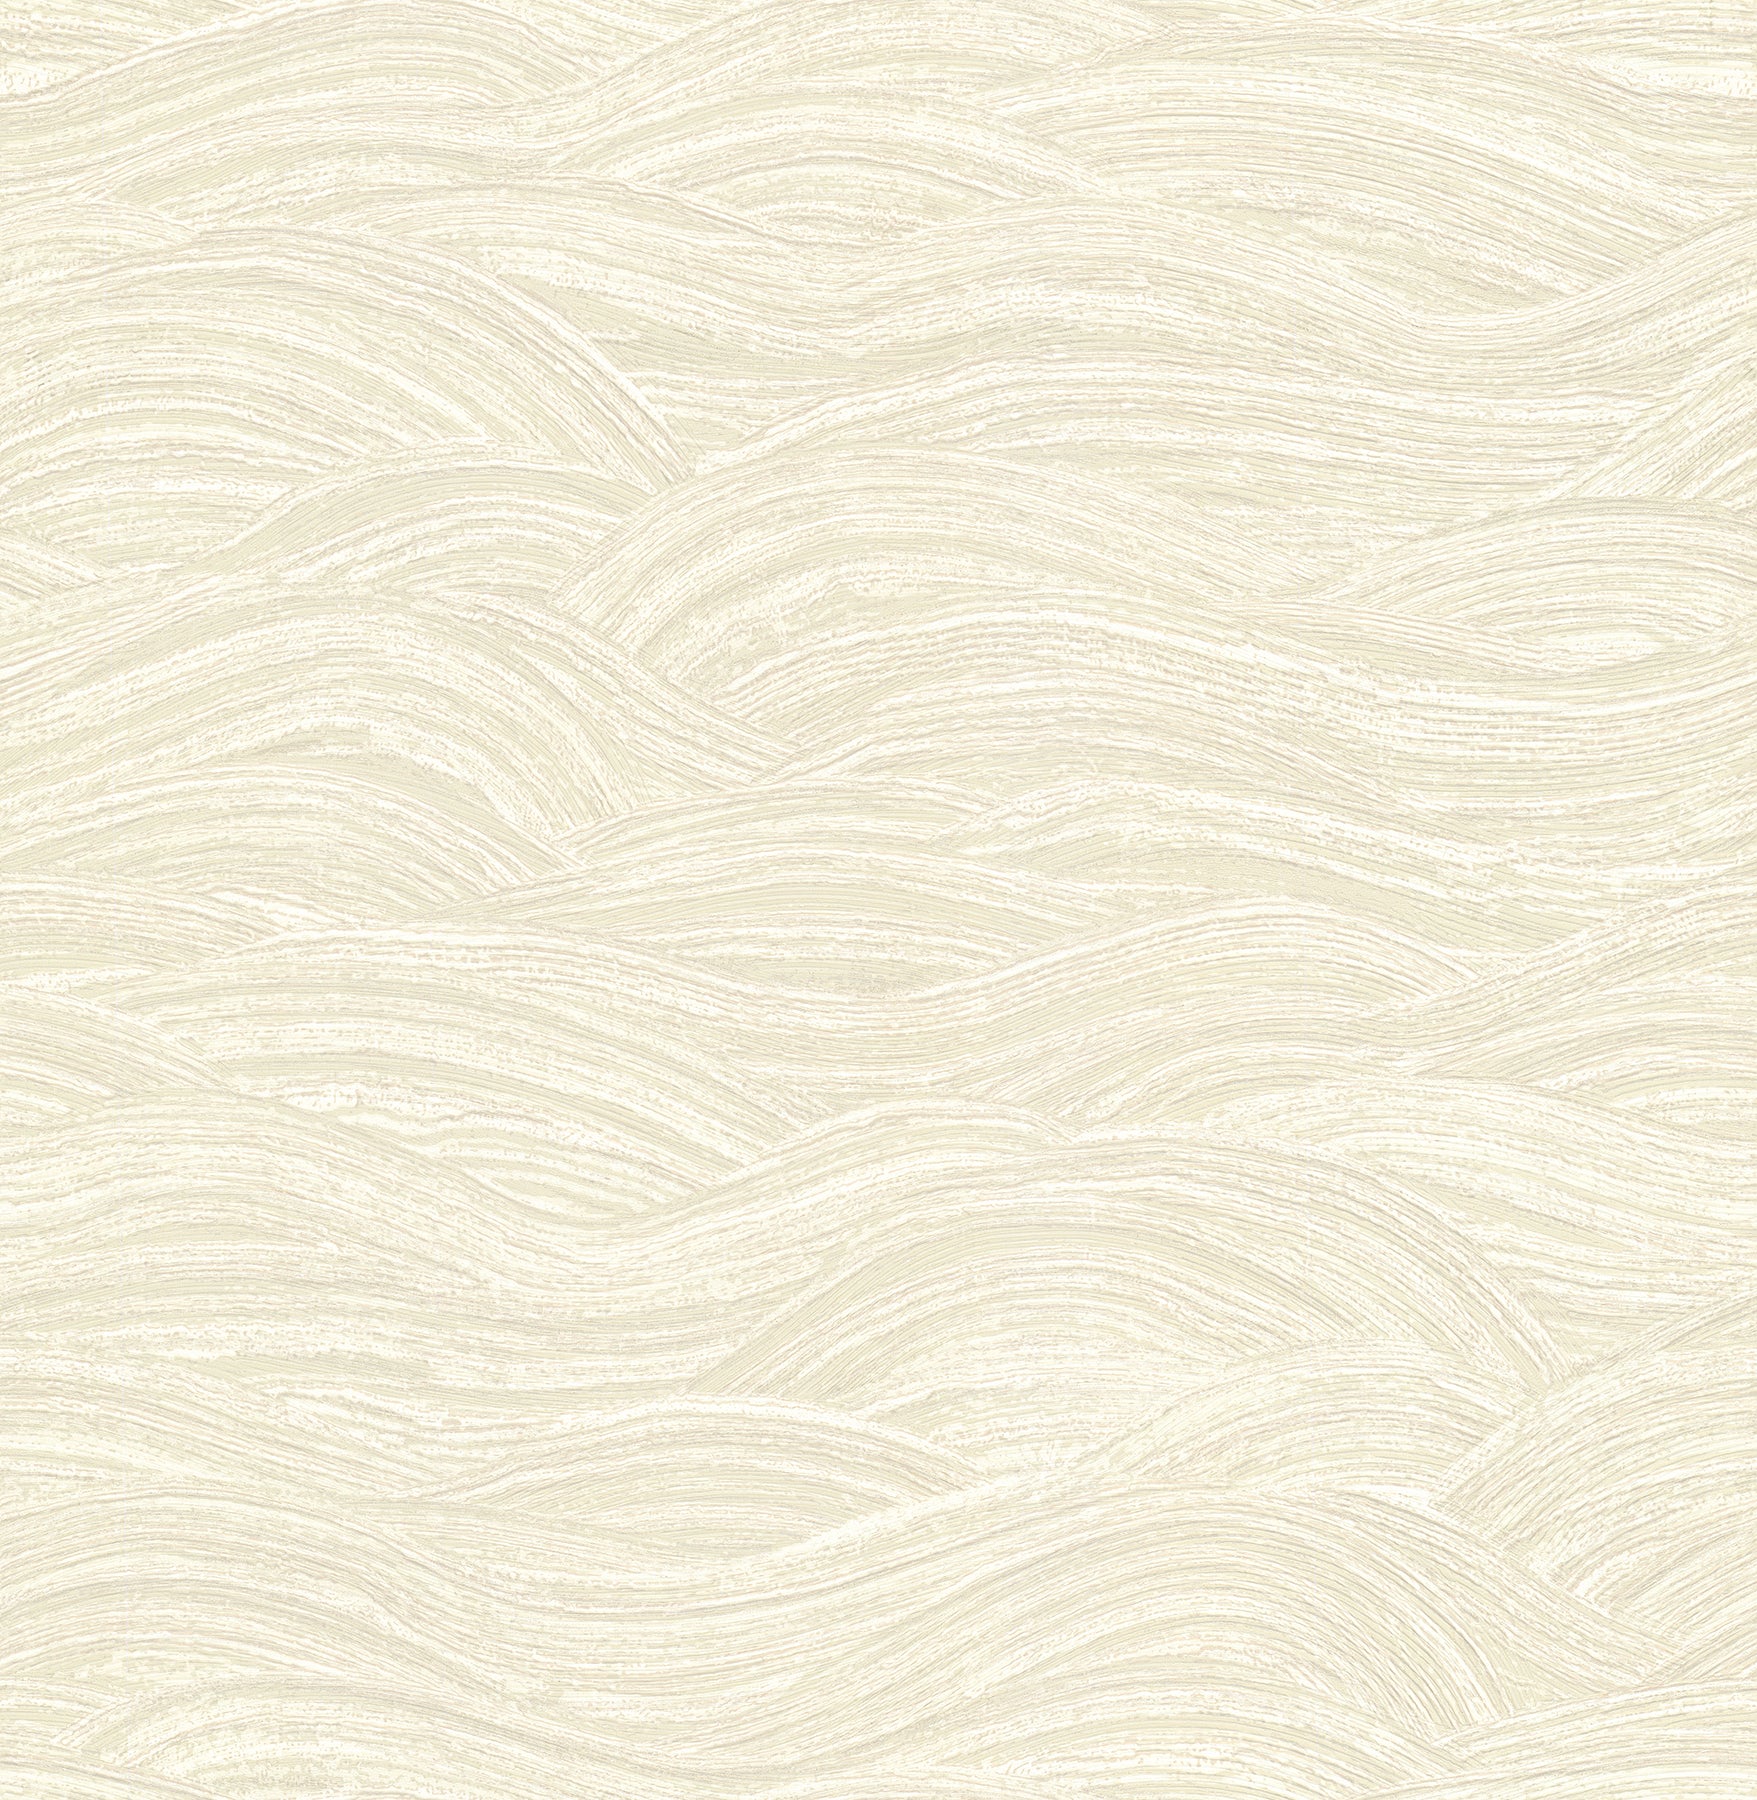 Looking for 2971-86362 Dimensions Leith Cream Zen Waves Cream A-Street Prints Wallpaper